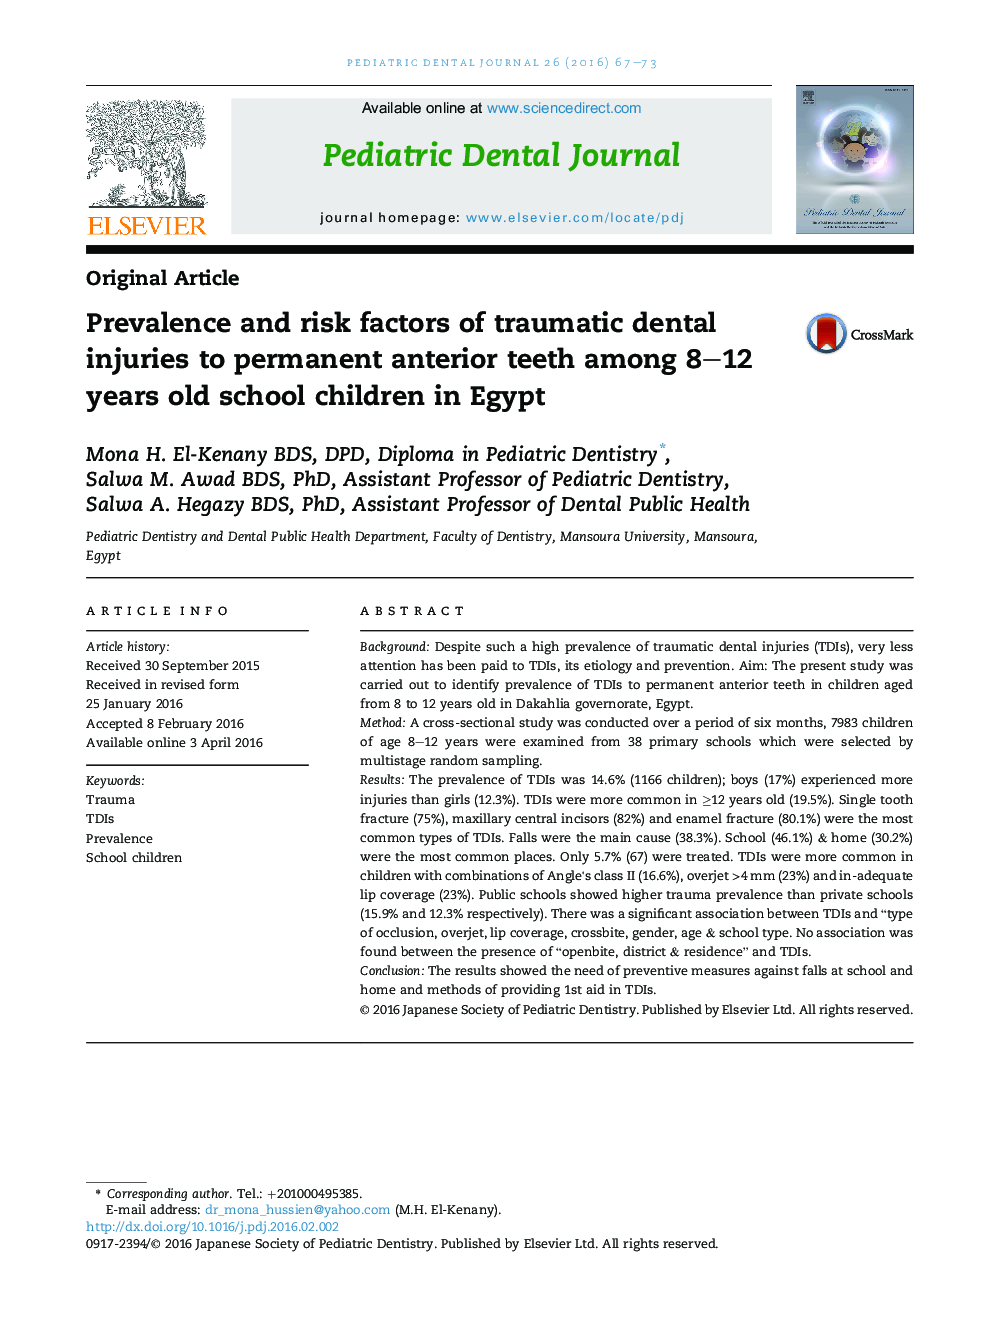 Prevalence and risk factors of traumatic dental injuries to permanent anterior teeth among 8–12 years old school children in Egypt